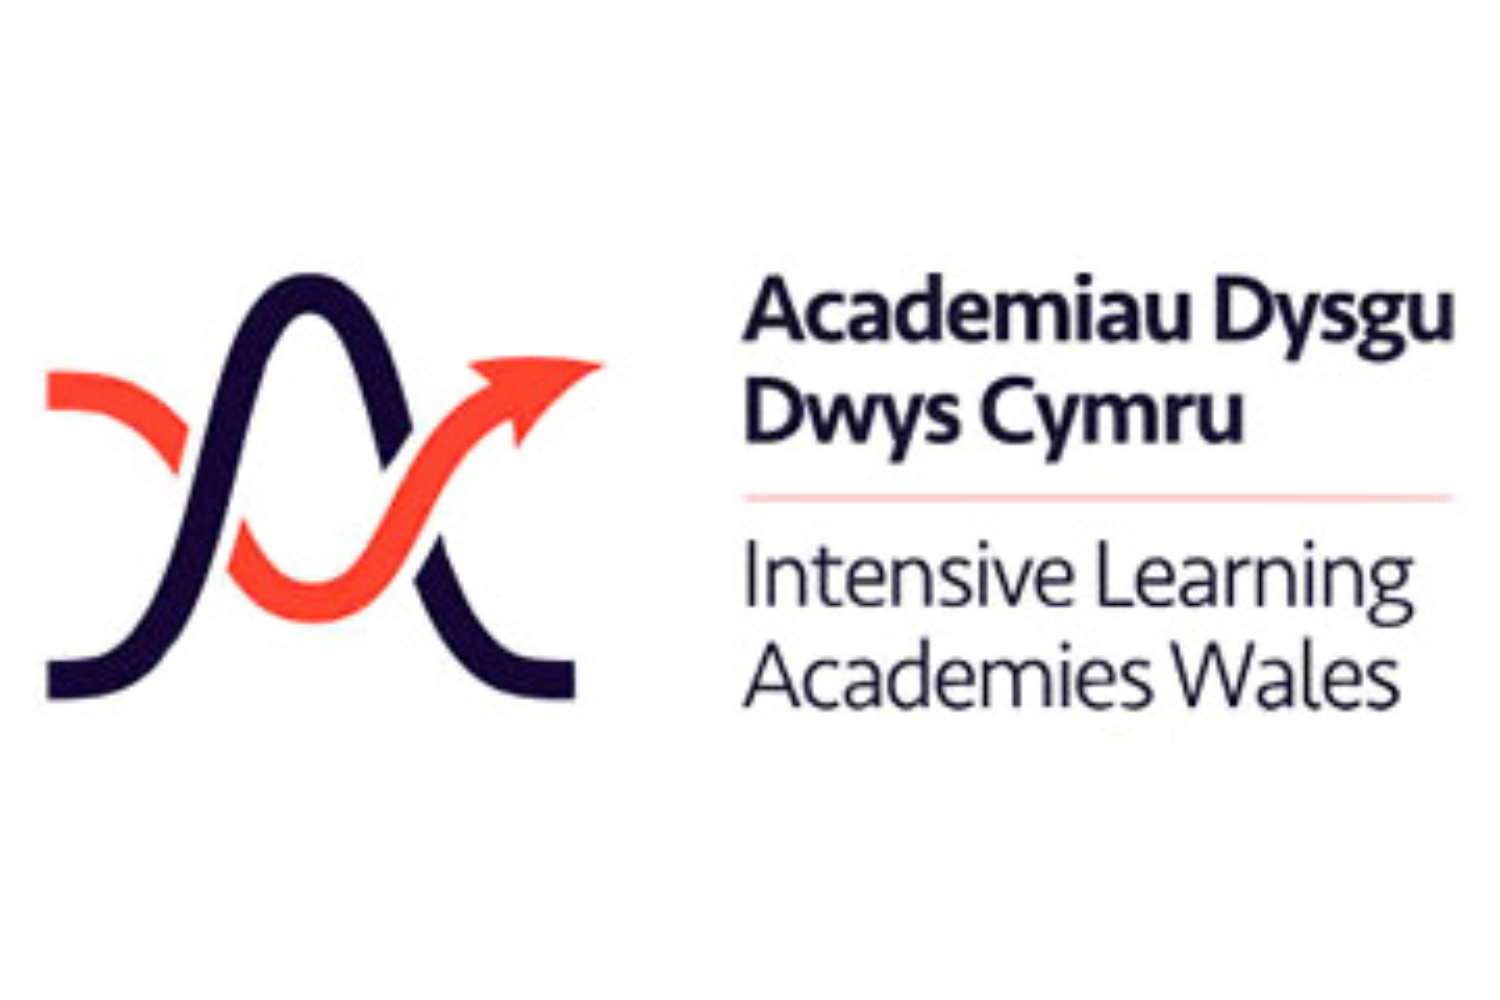 Intensive Learning Academies Wales logo